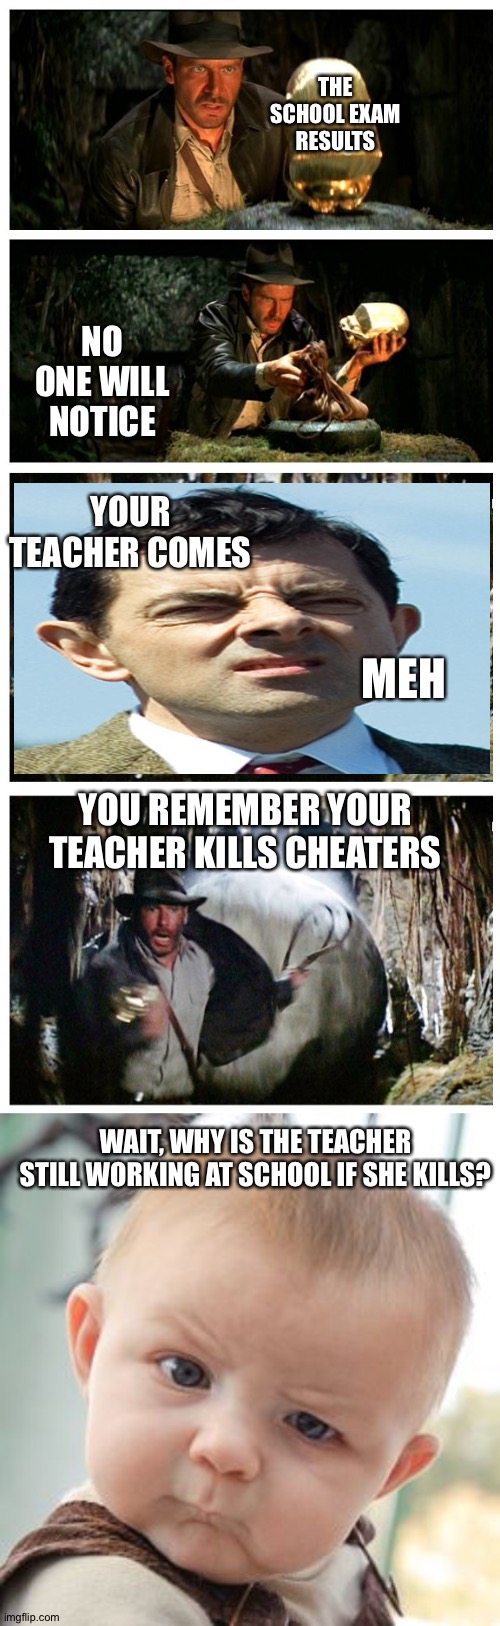 Exam | THE SCHOOL EXAM RESULTS; NO ONE WILL NOTICE; YOUR TEACHER COMES; MEH; YOU REMEMBER YOUR TEACHER KILLS CHEATERS; WAIT, WHY IS THE TEACHER STILL WORKING AT SCHOOL IF SHE KILLS? | image tagged in stealing the front page,memes,skeptical baby | made w/ Imgflip meme maker